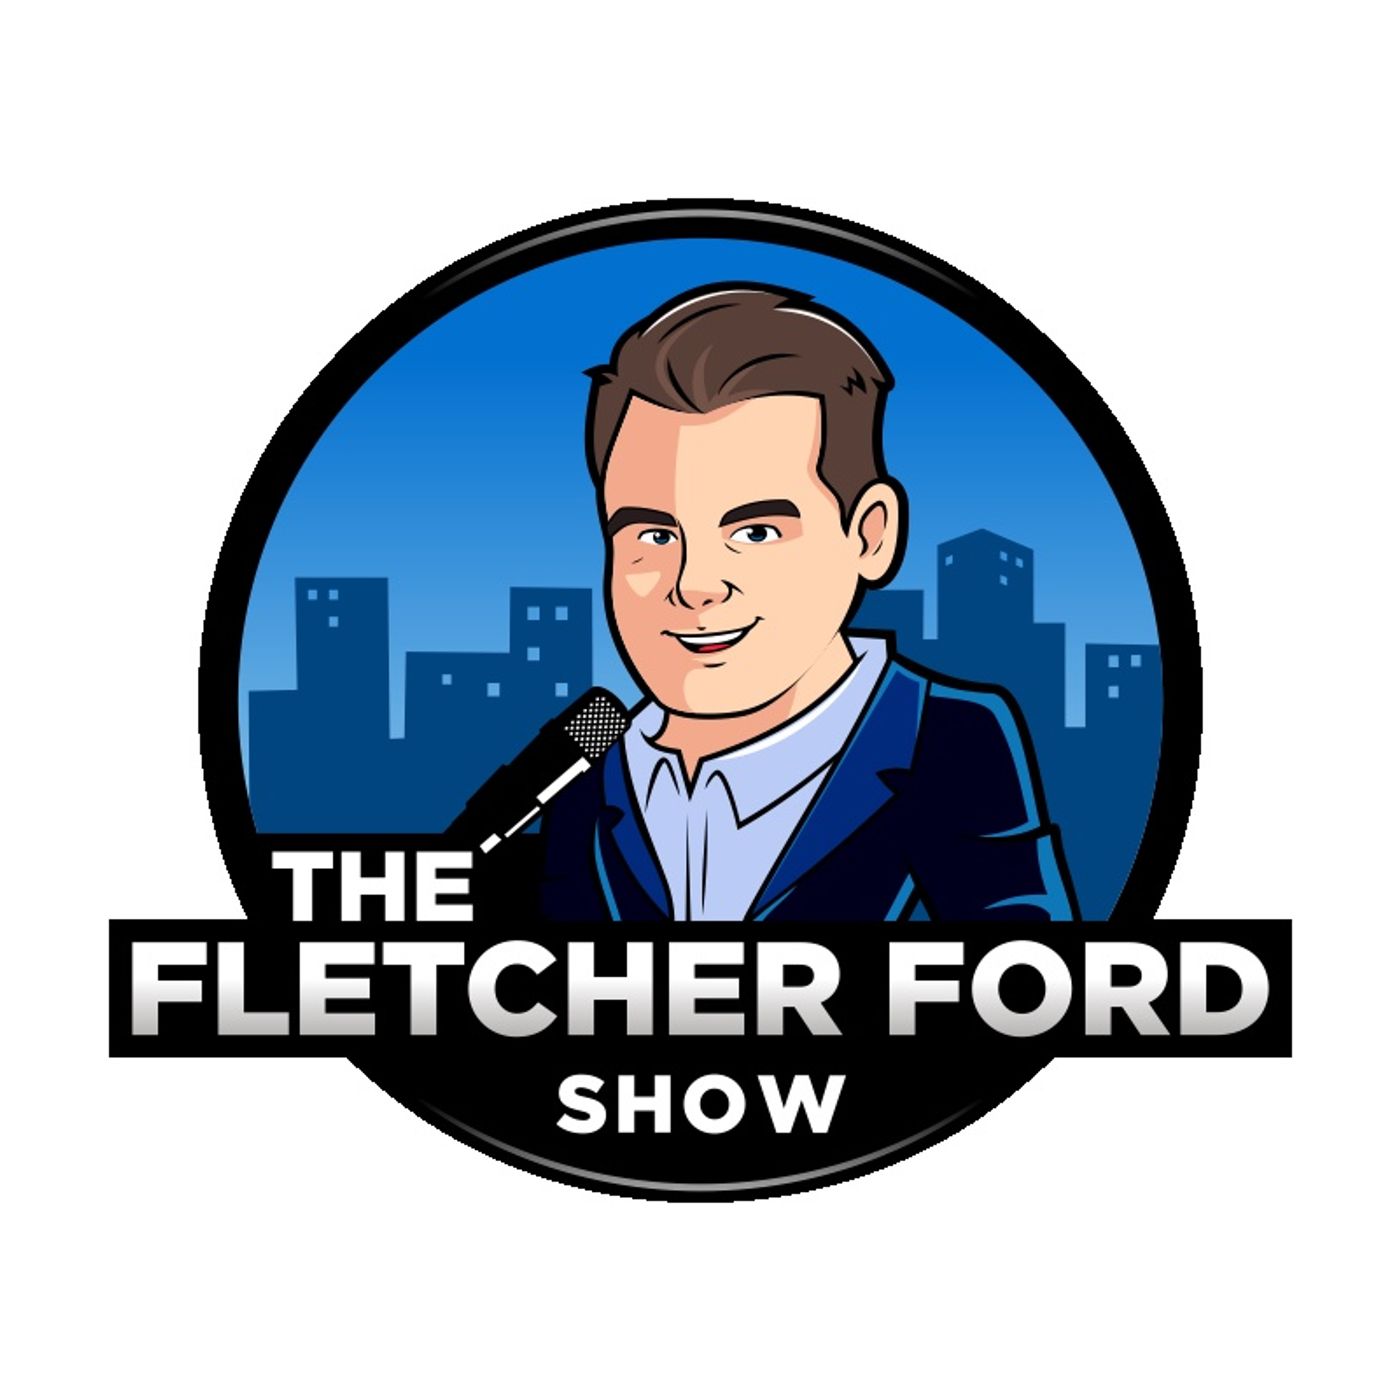 The Fletcher Ford Show